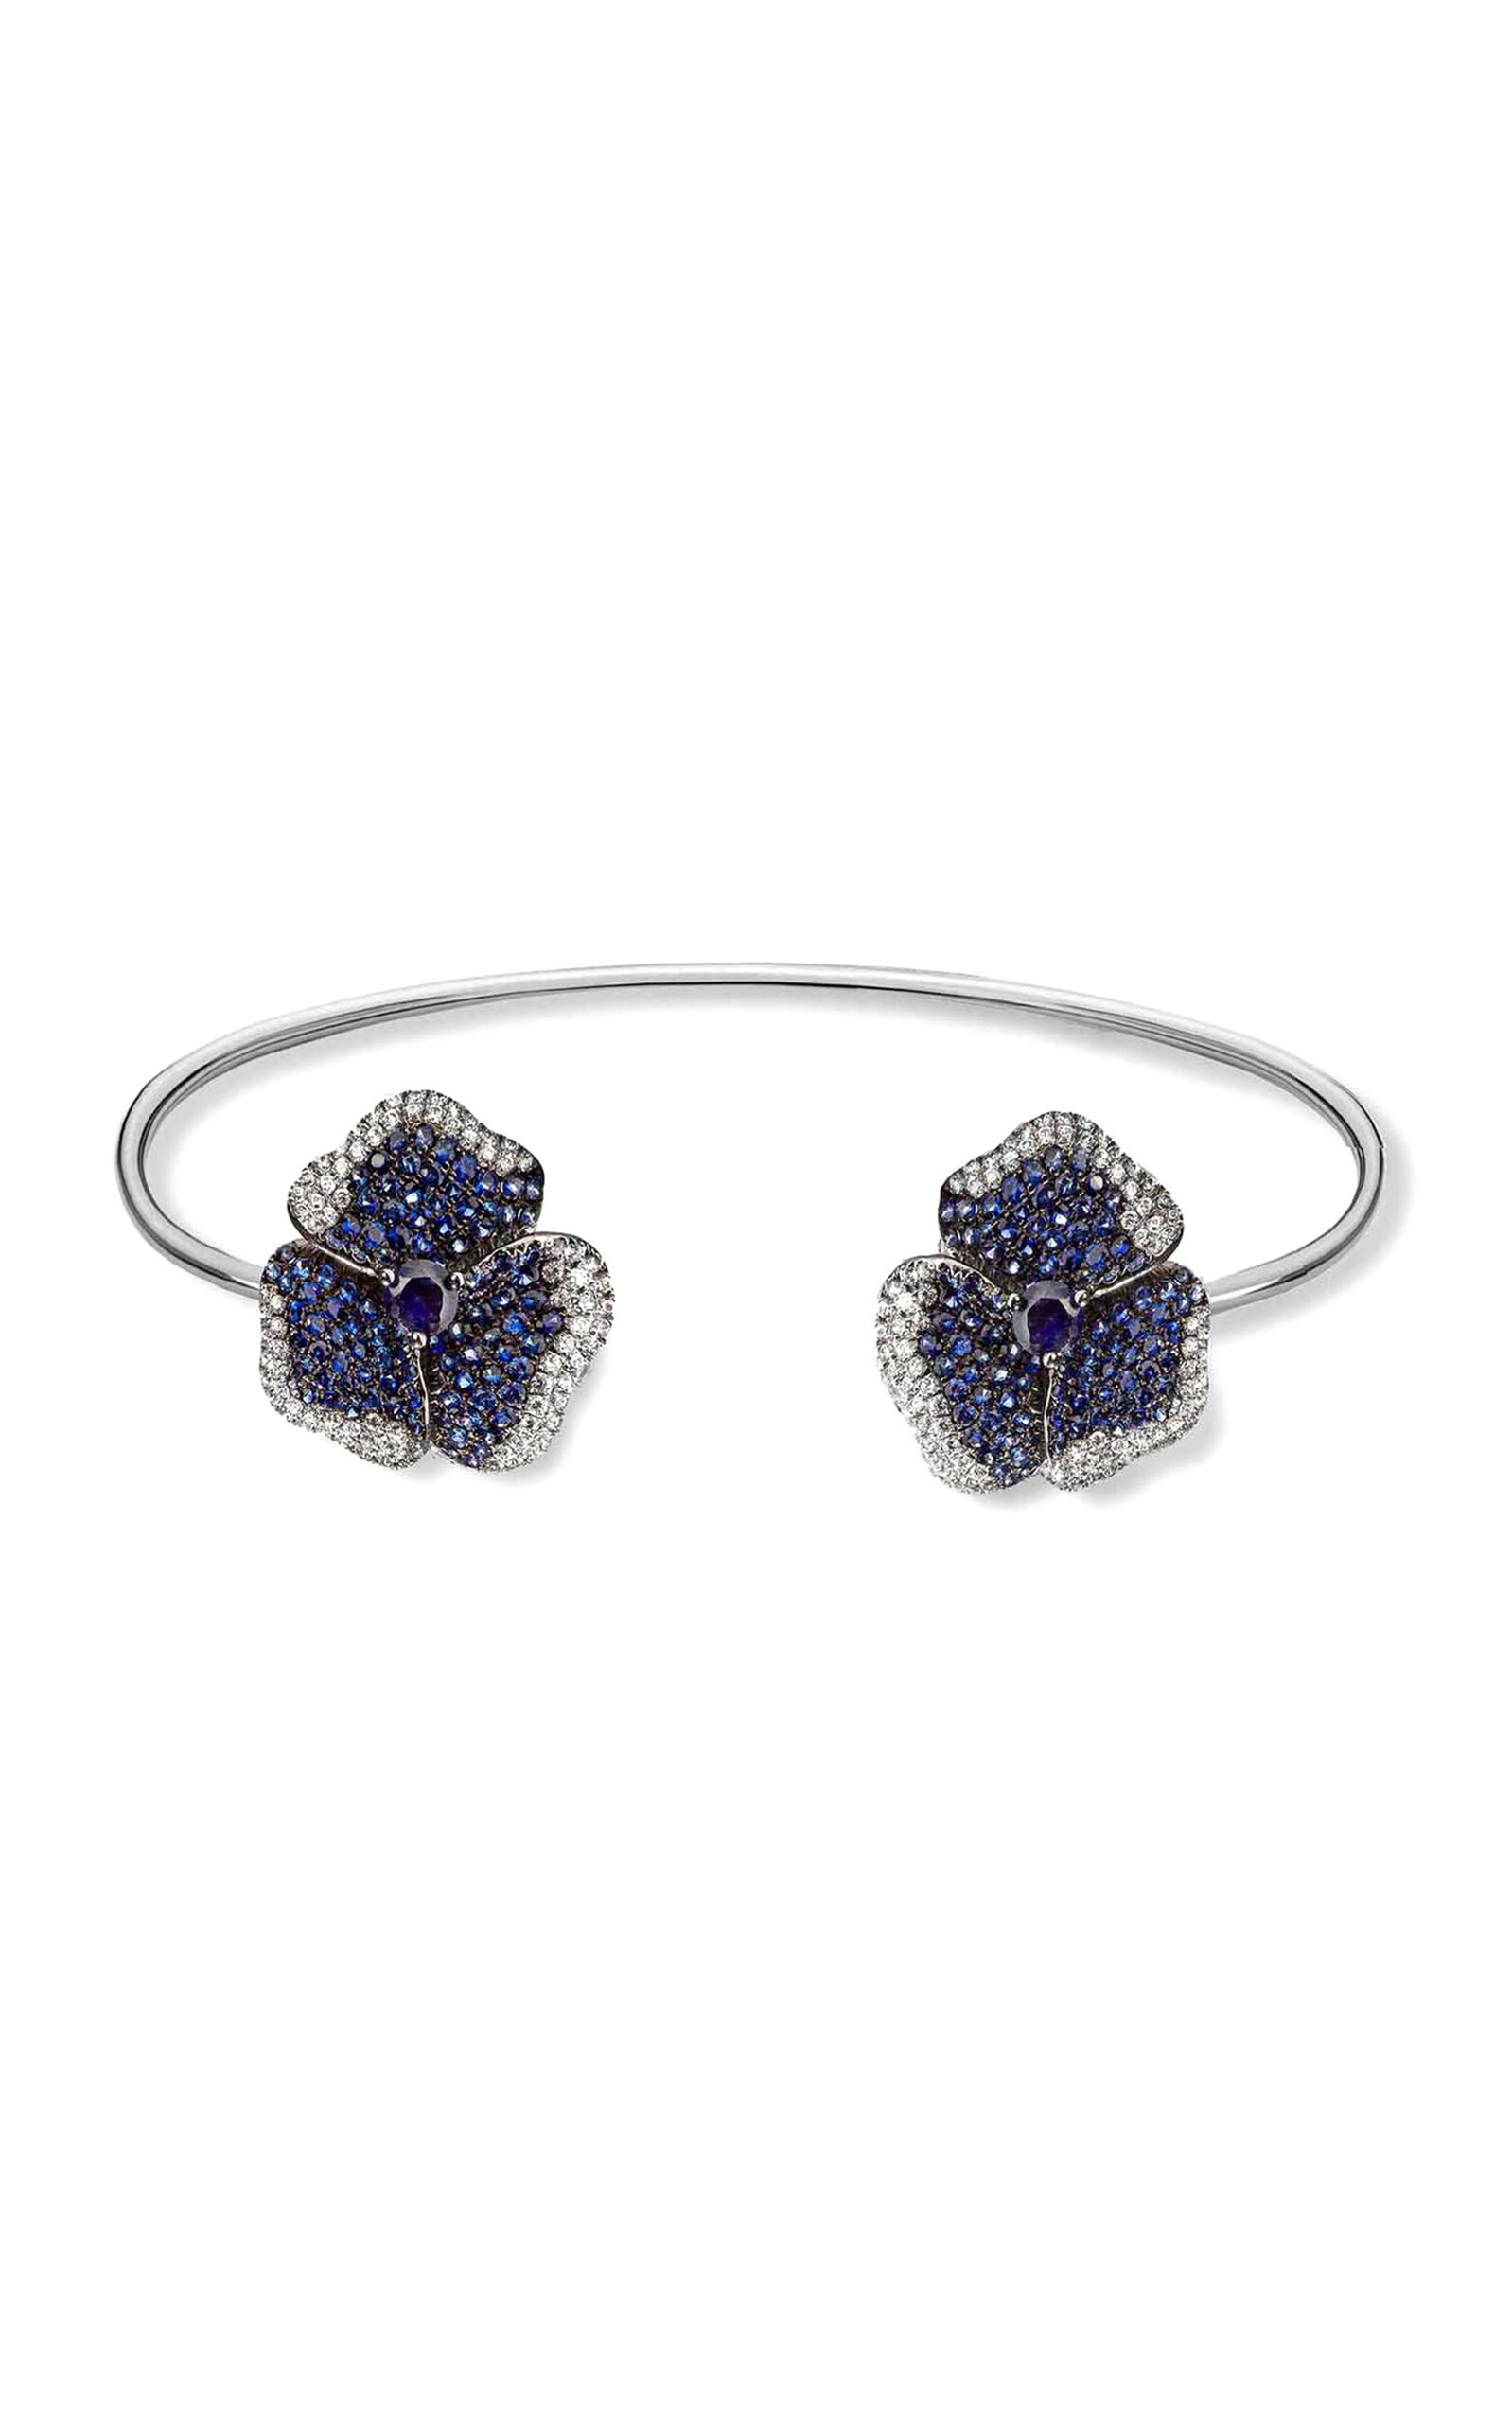 One of a Kind Bloom 18K White Gold; Diamond; And Sapphire Bangle